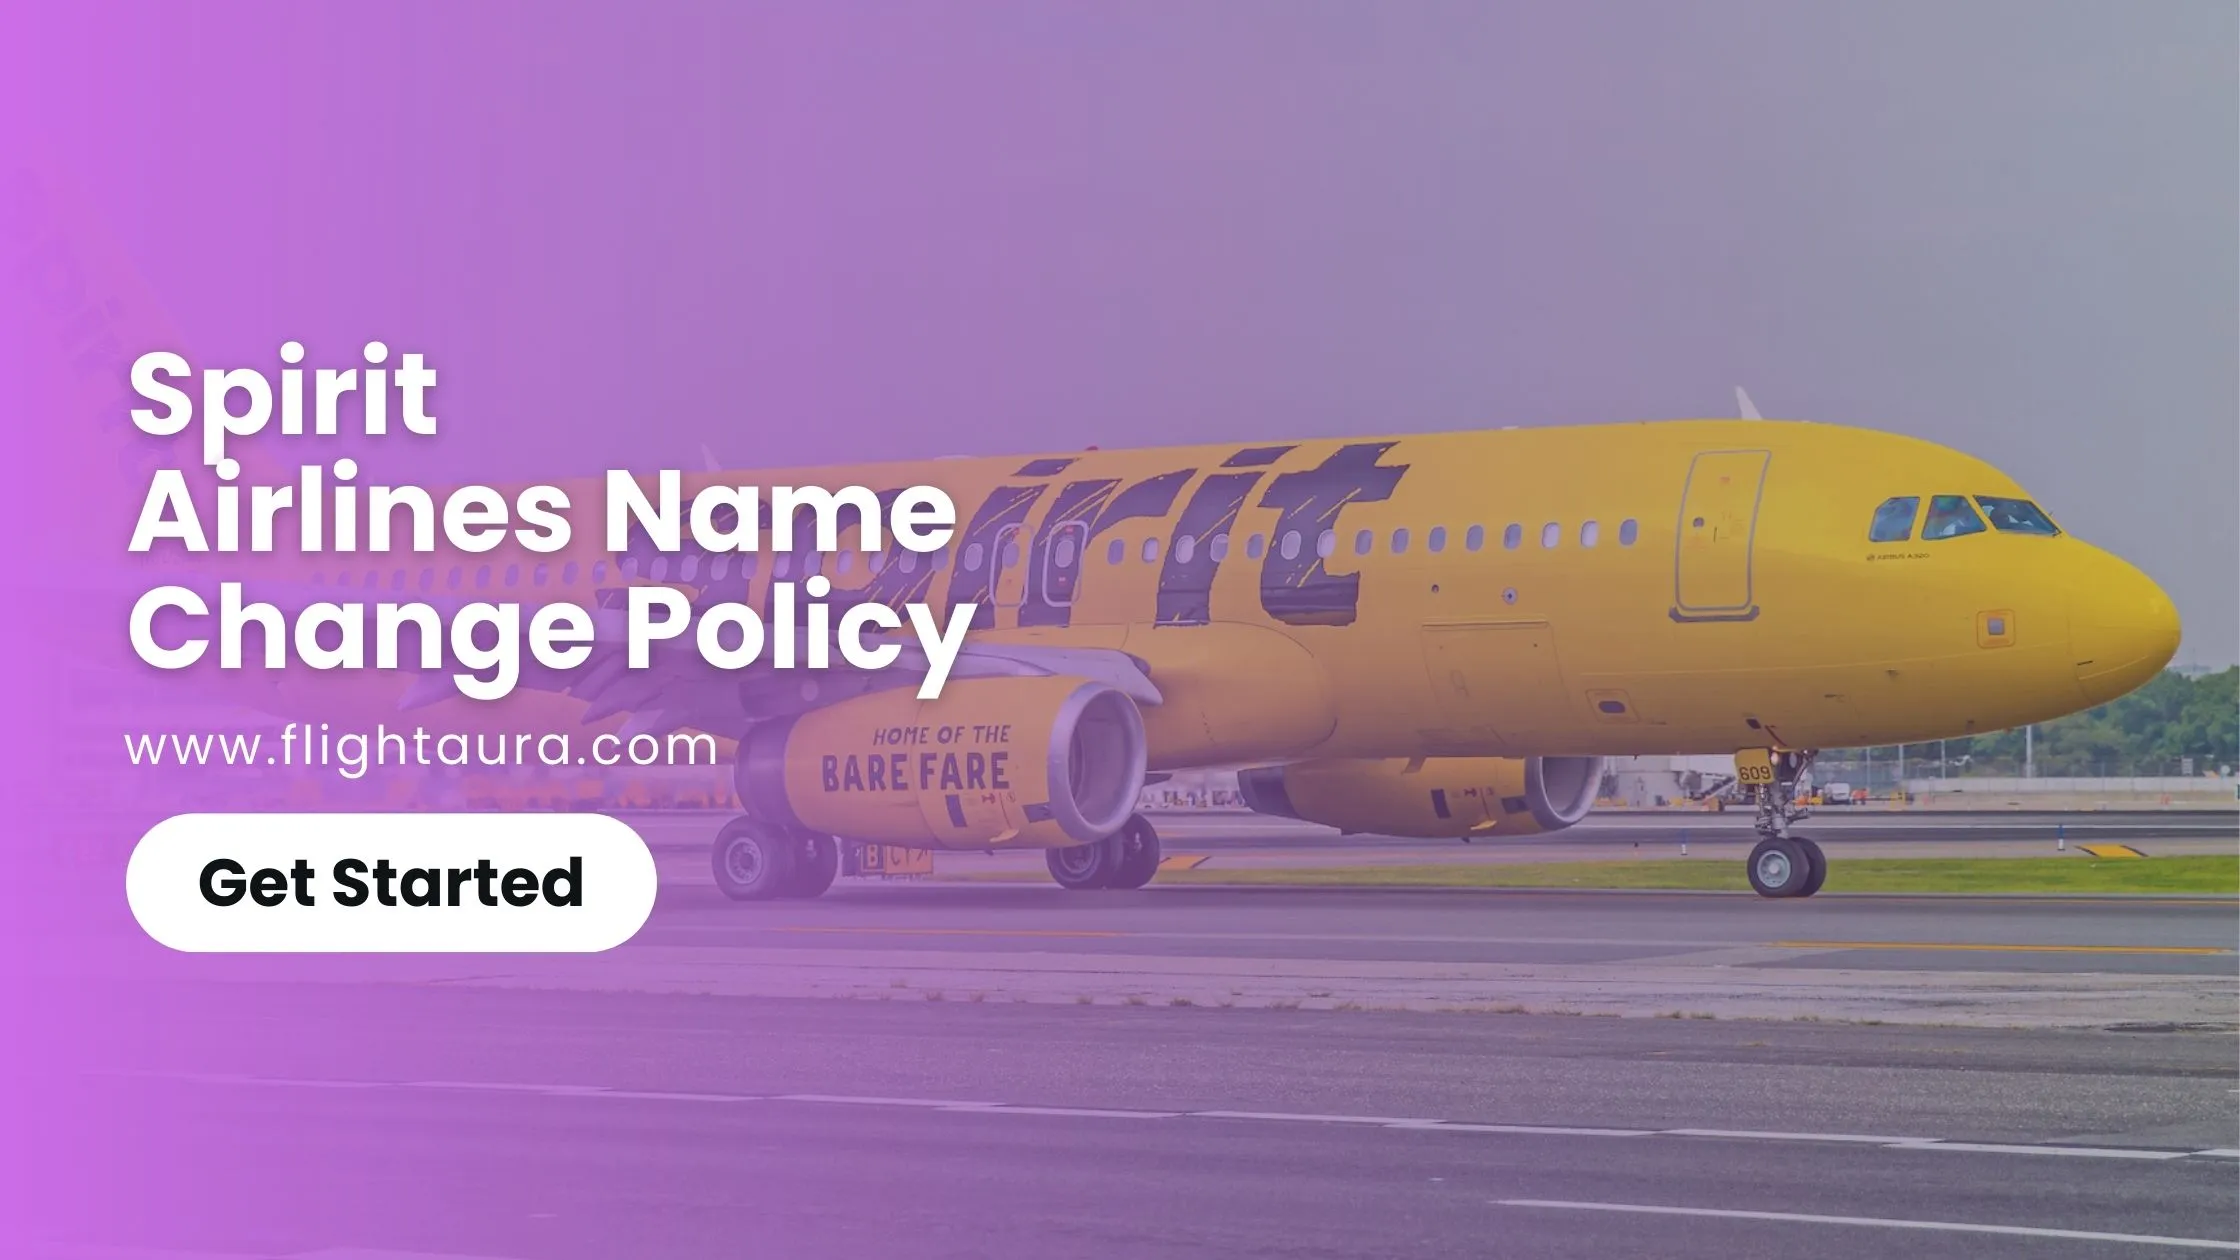 Spirit Airlines name change policy